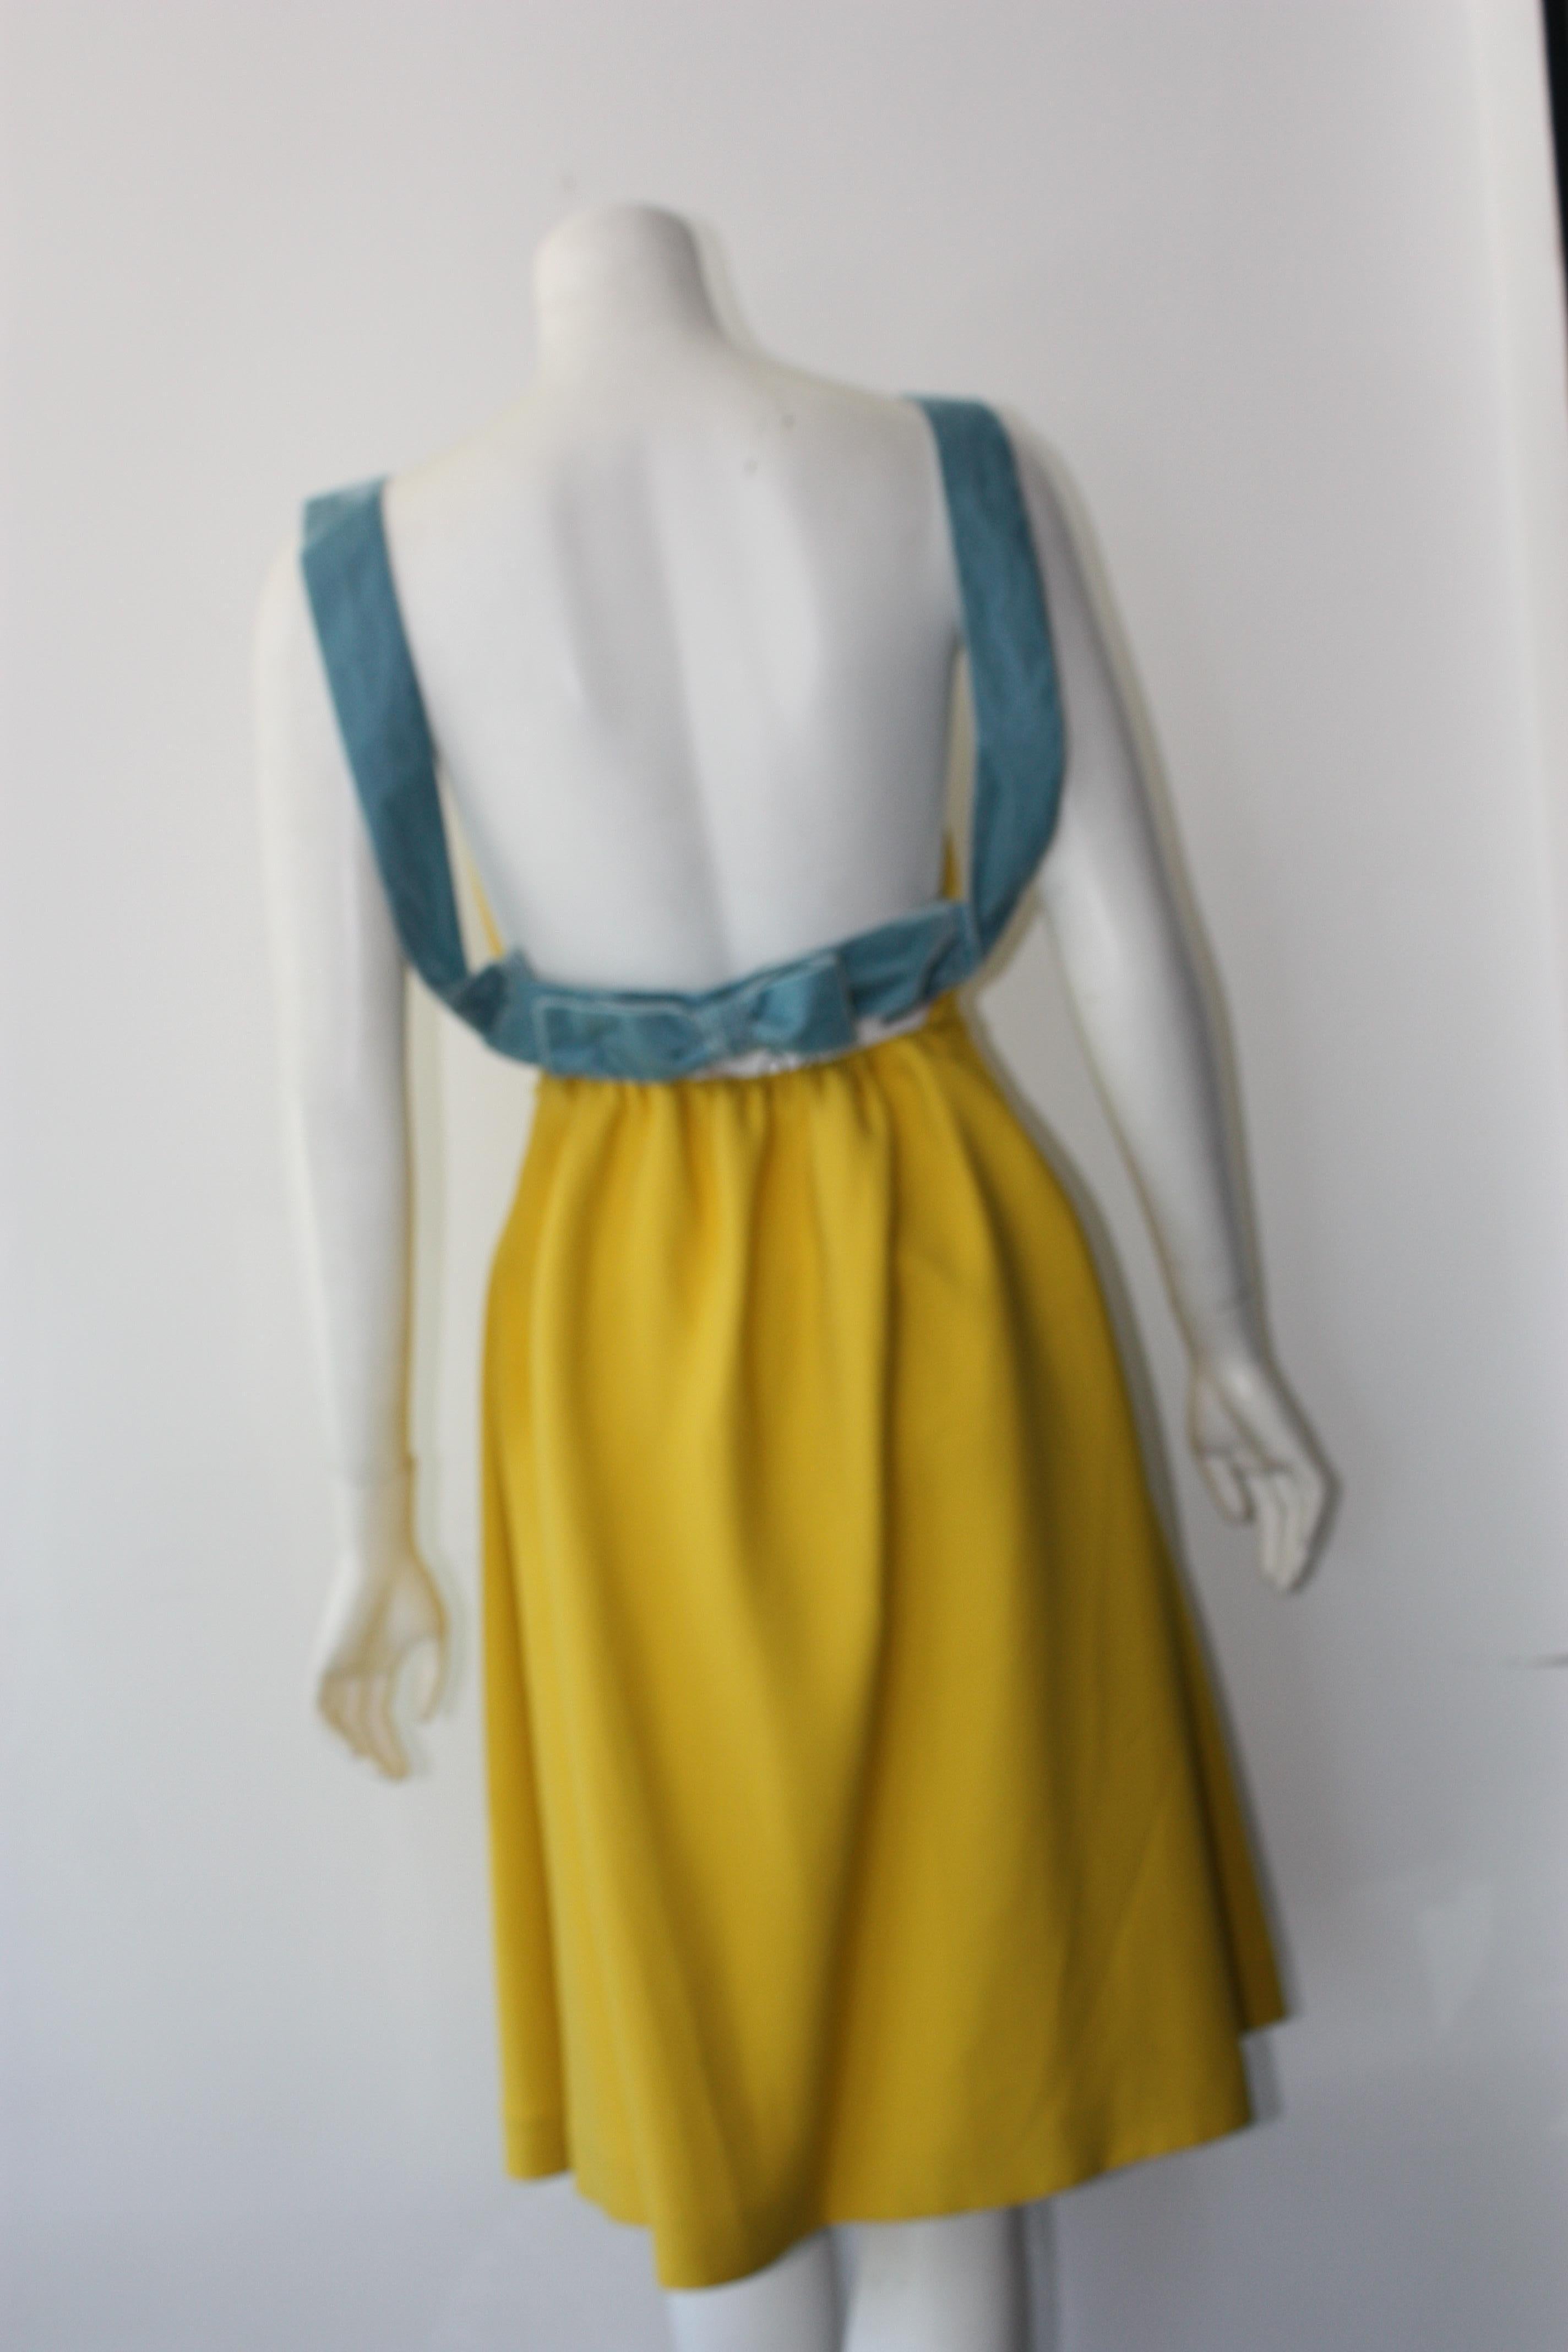 Prada Special Yellow and Blue Edition Dress  In Excellent Condition For Sale In Thousand Oaks, CA